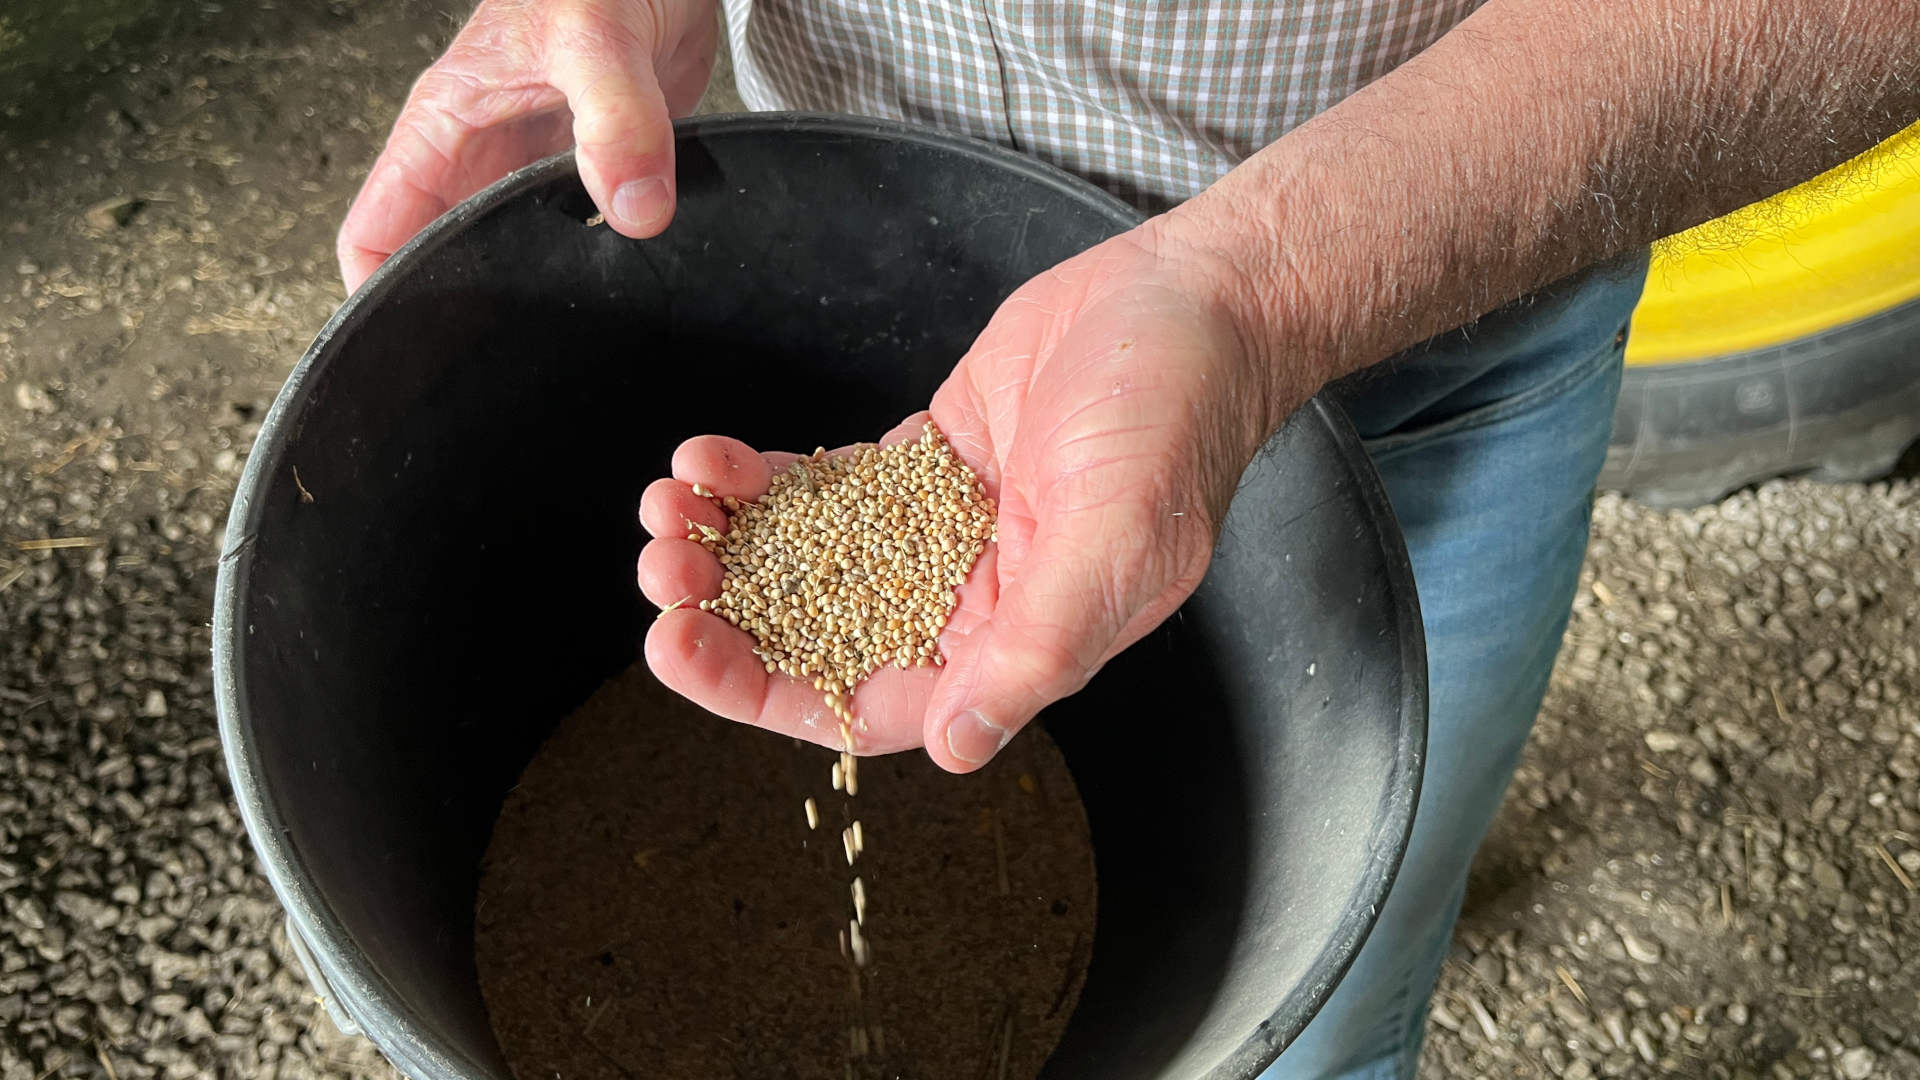 Farmer Jeff Taylor holds proso millet, a grain he start growing on his farm outside of Ames, Iowa, around six years ago.